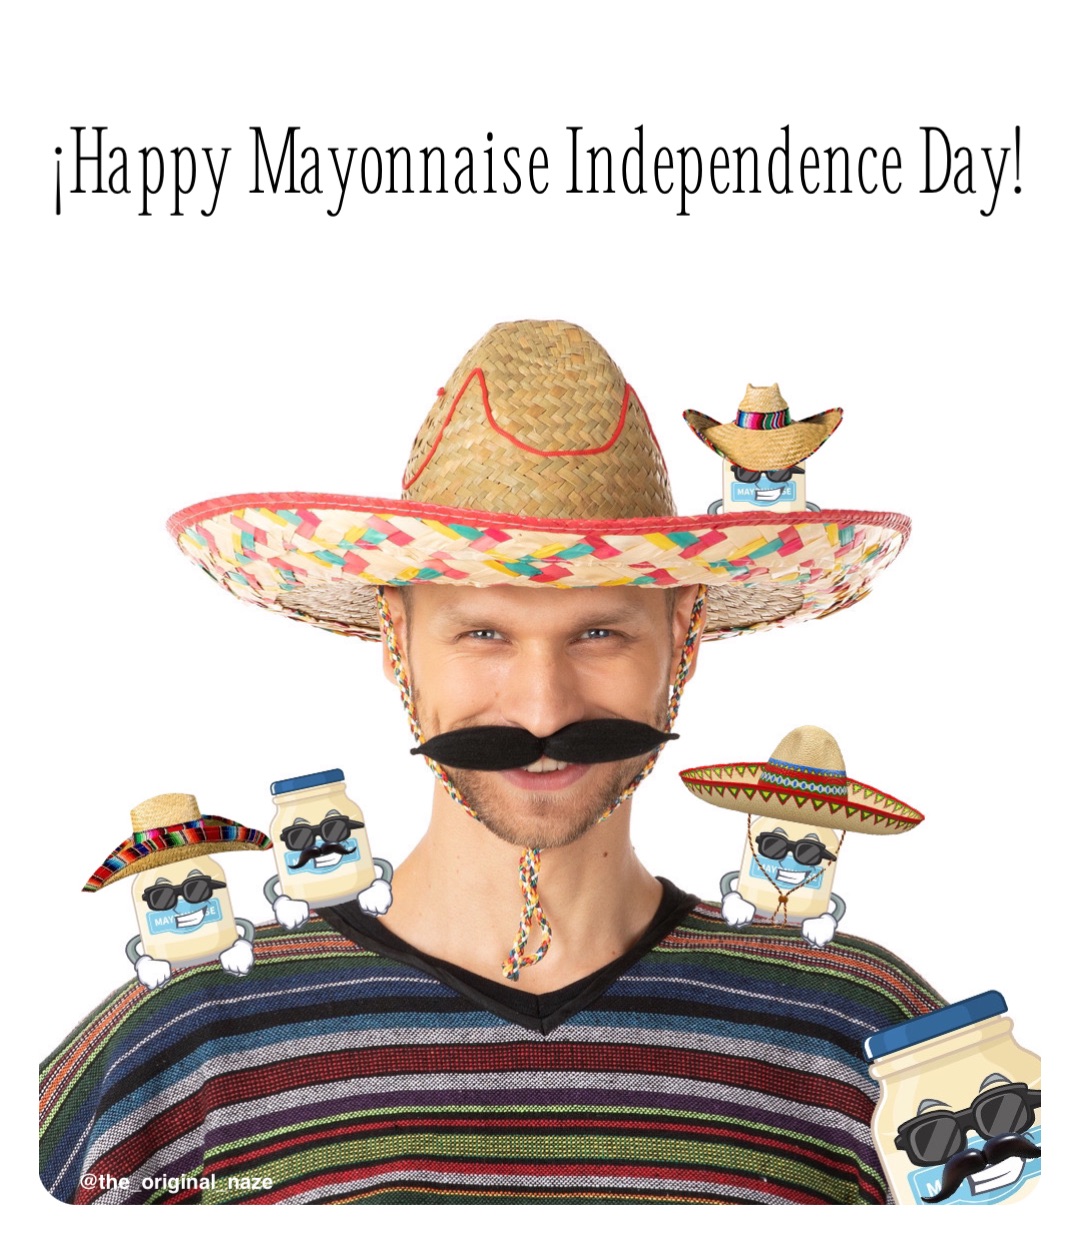 ¡Happy Mayonnaise Independence Day!